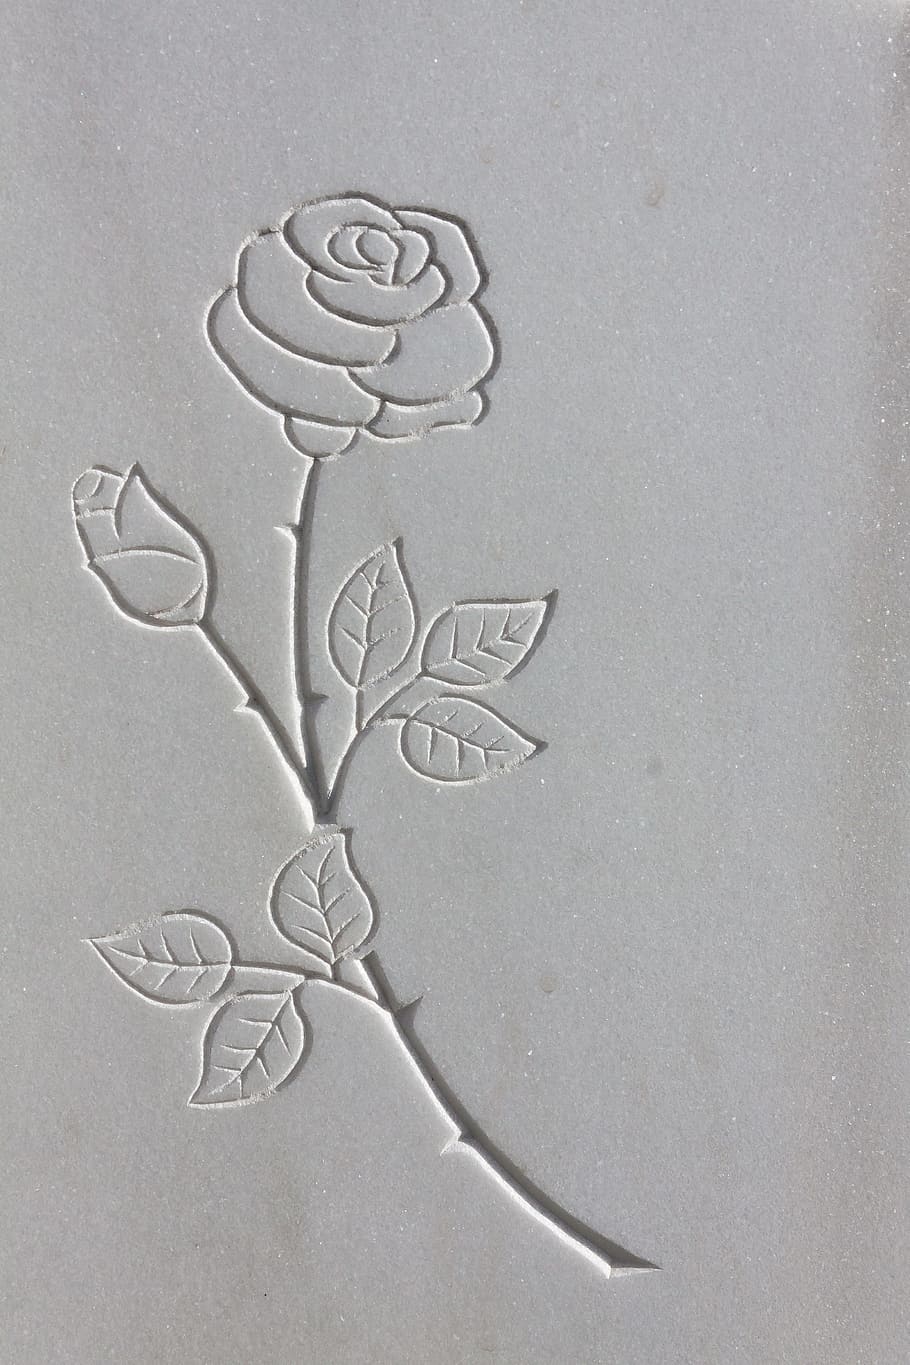 closeup, photography, rose, flower, carved, panel, white Rose, illustration, thorns, rock carving